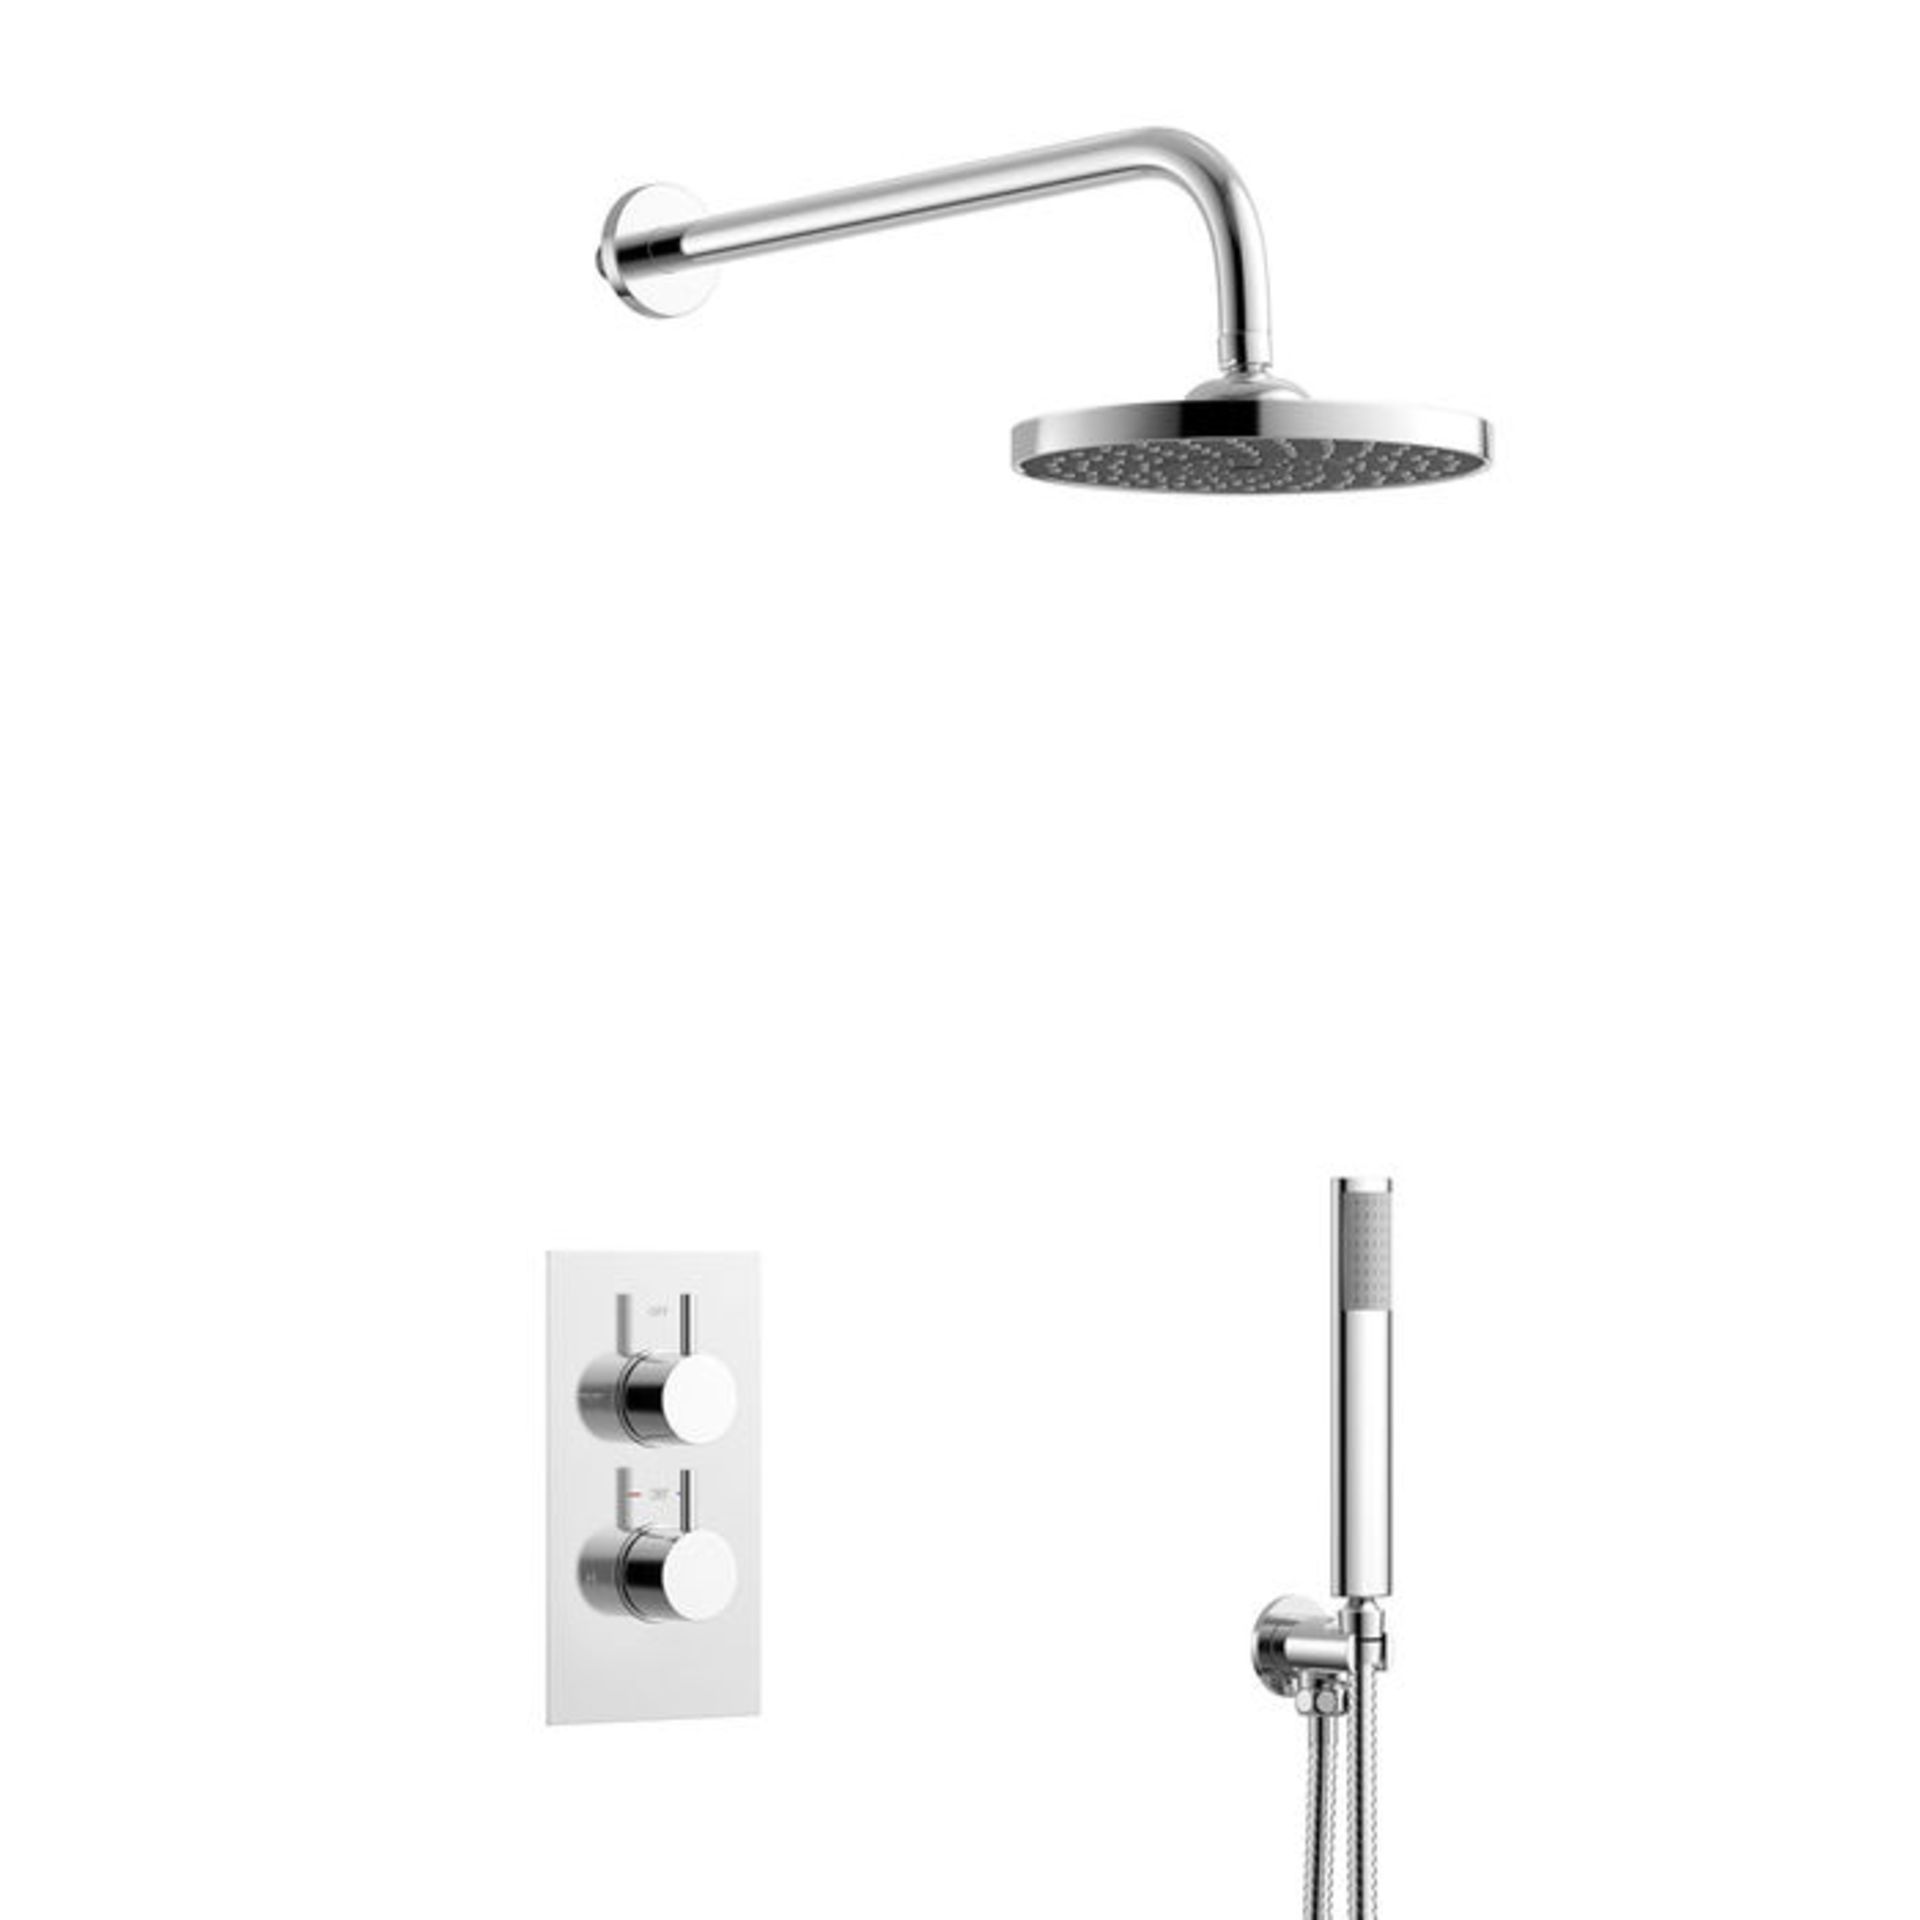 (XS47) Round Concealed Thermostatic Mixer Shower Kit & Medium Head. Family friendly detachable - Image 5 of 5